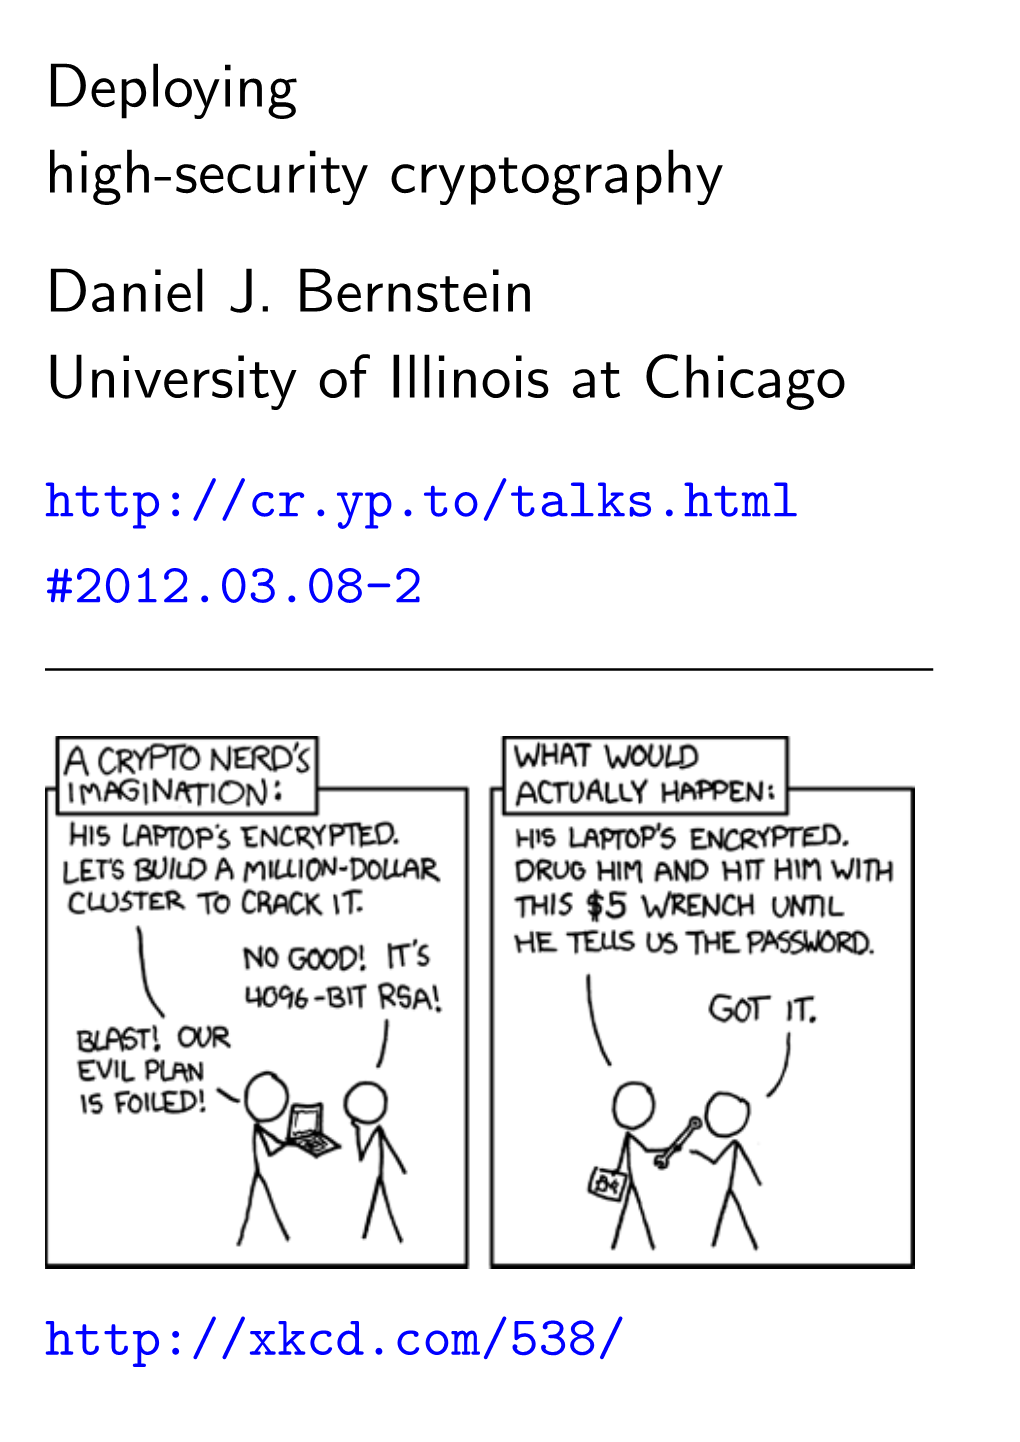 Deploying High-Security Cryptography Daniel J. Bernstein University of Illinois at Chicago #2012.03.08-2